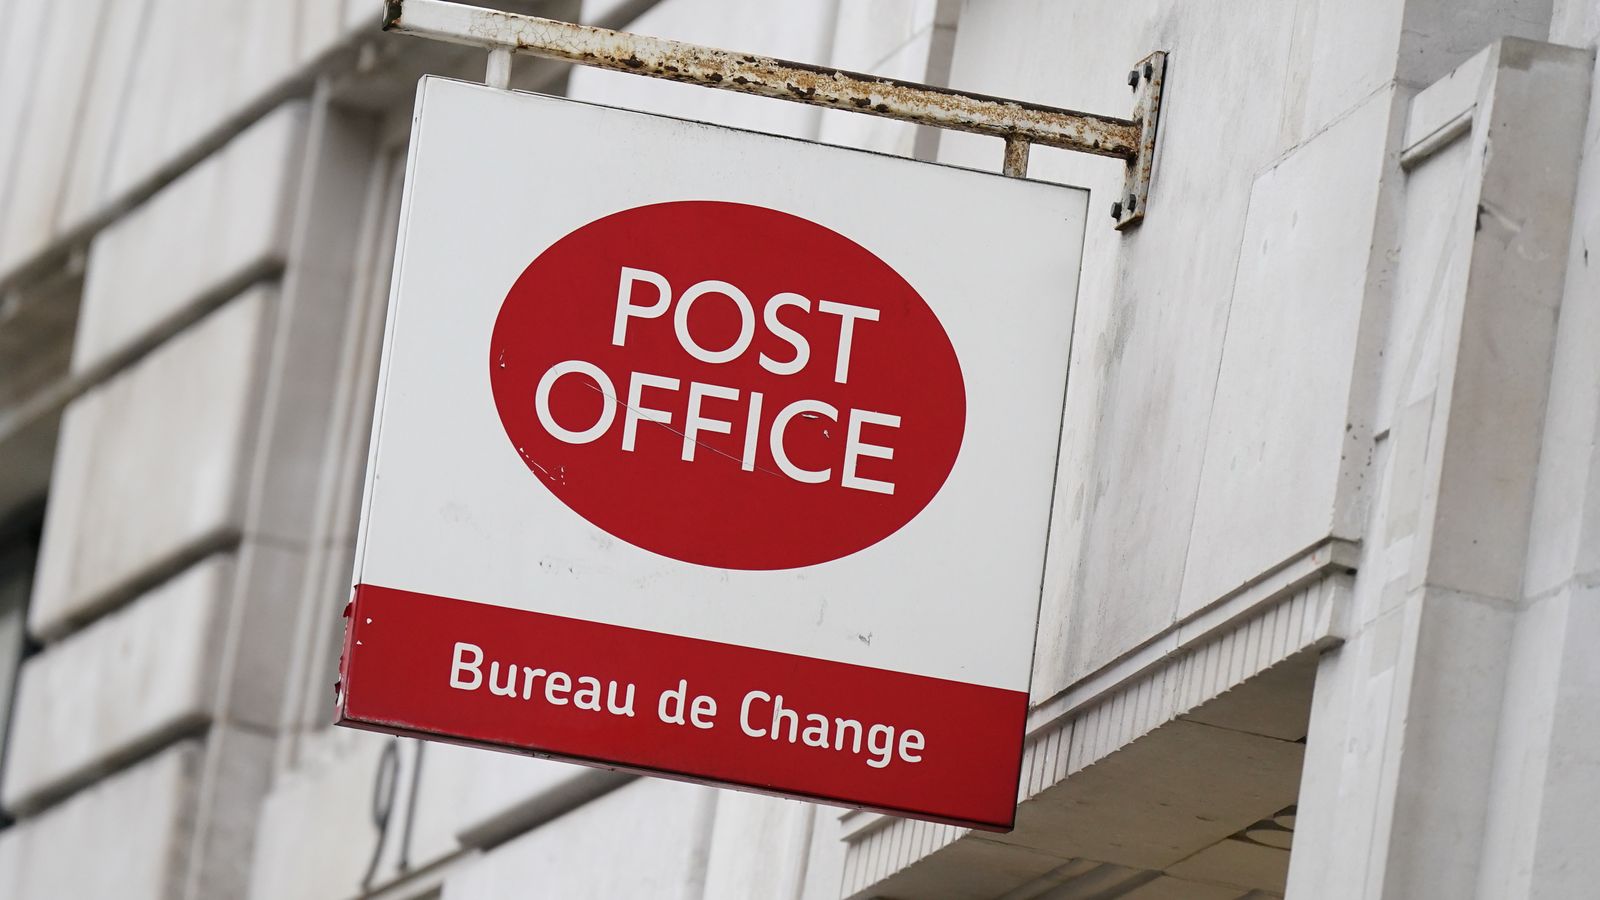 Post Office 'attempted to pervert the course of justice', lawyer alleges in new submission to inquiry